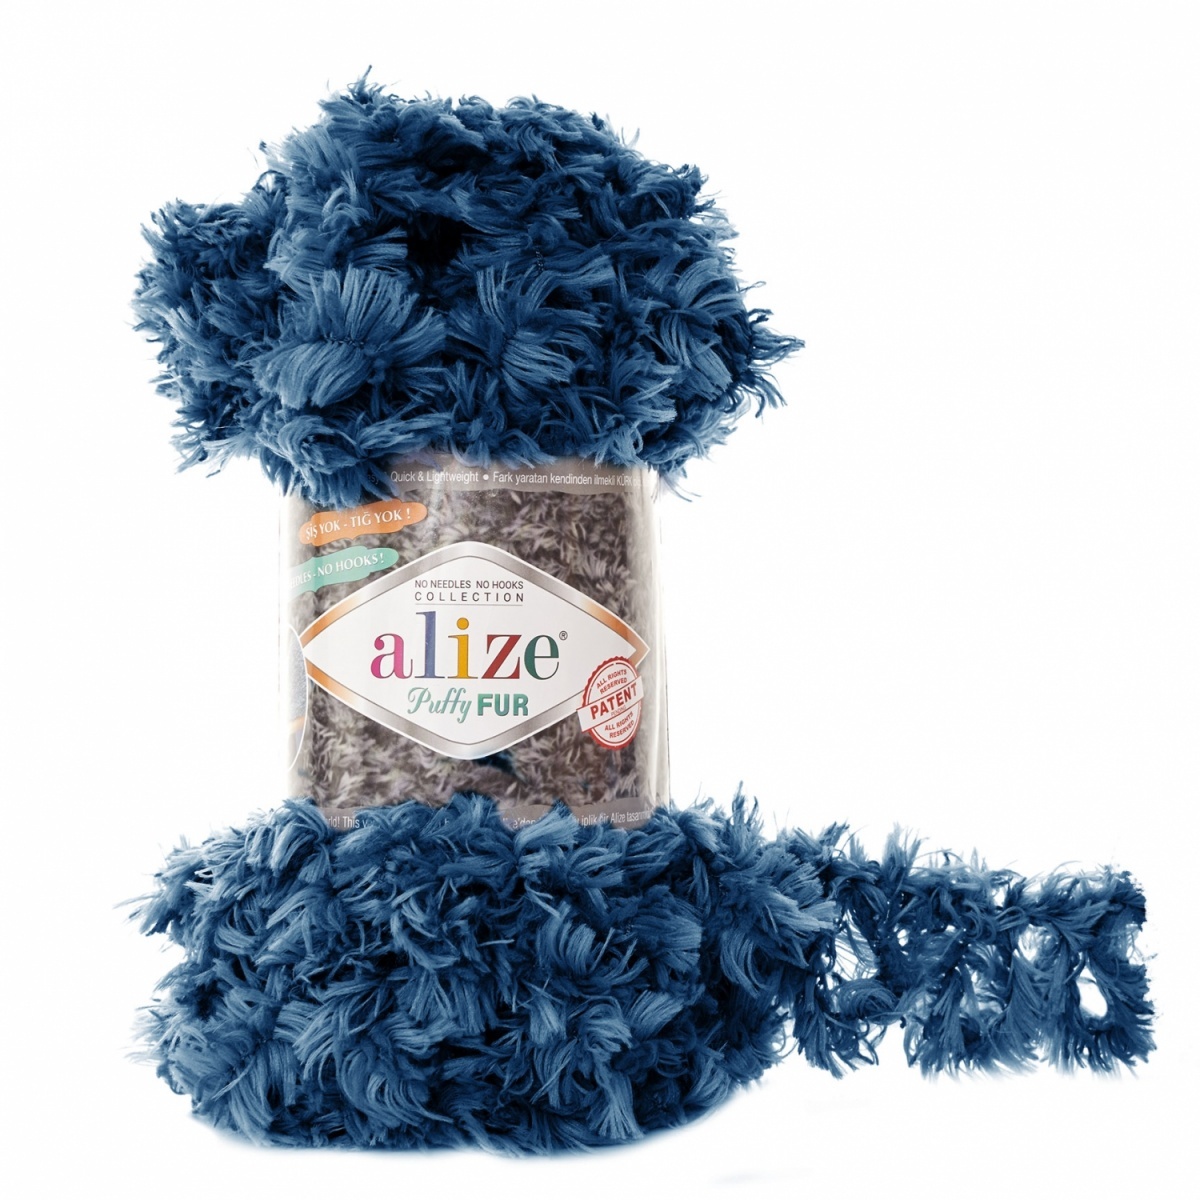 Alize Puffy Fur, 100% Polyester 5 Skein Value Pack, 500g фото 11